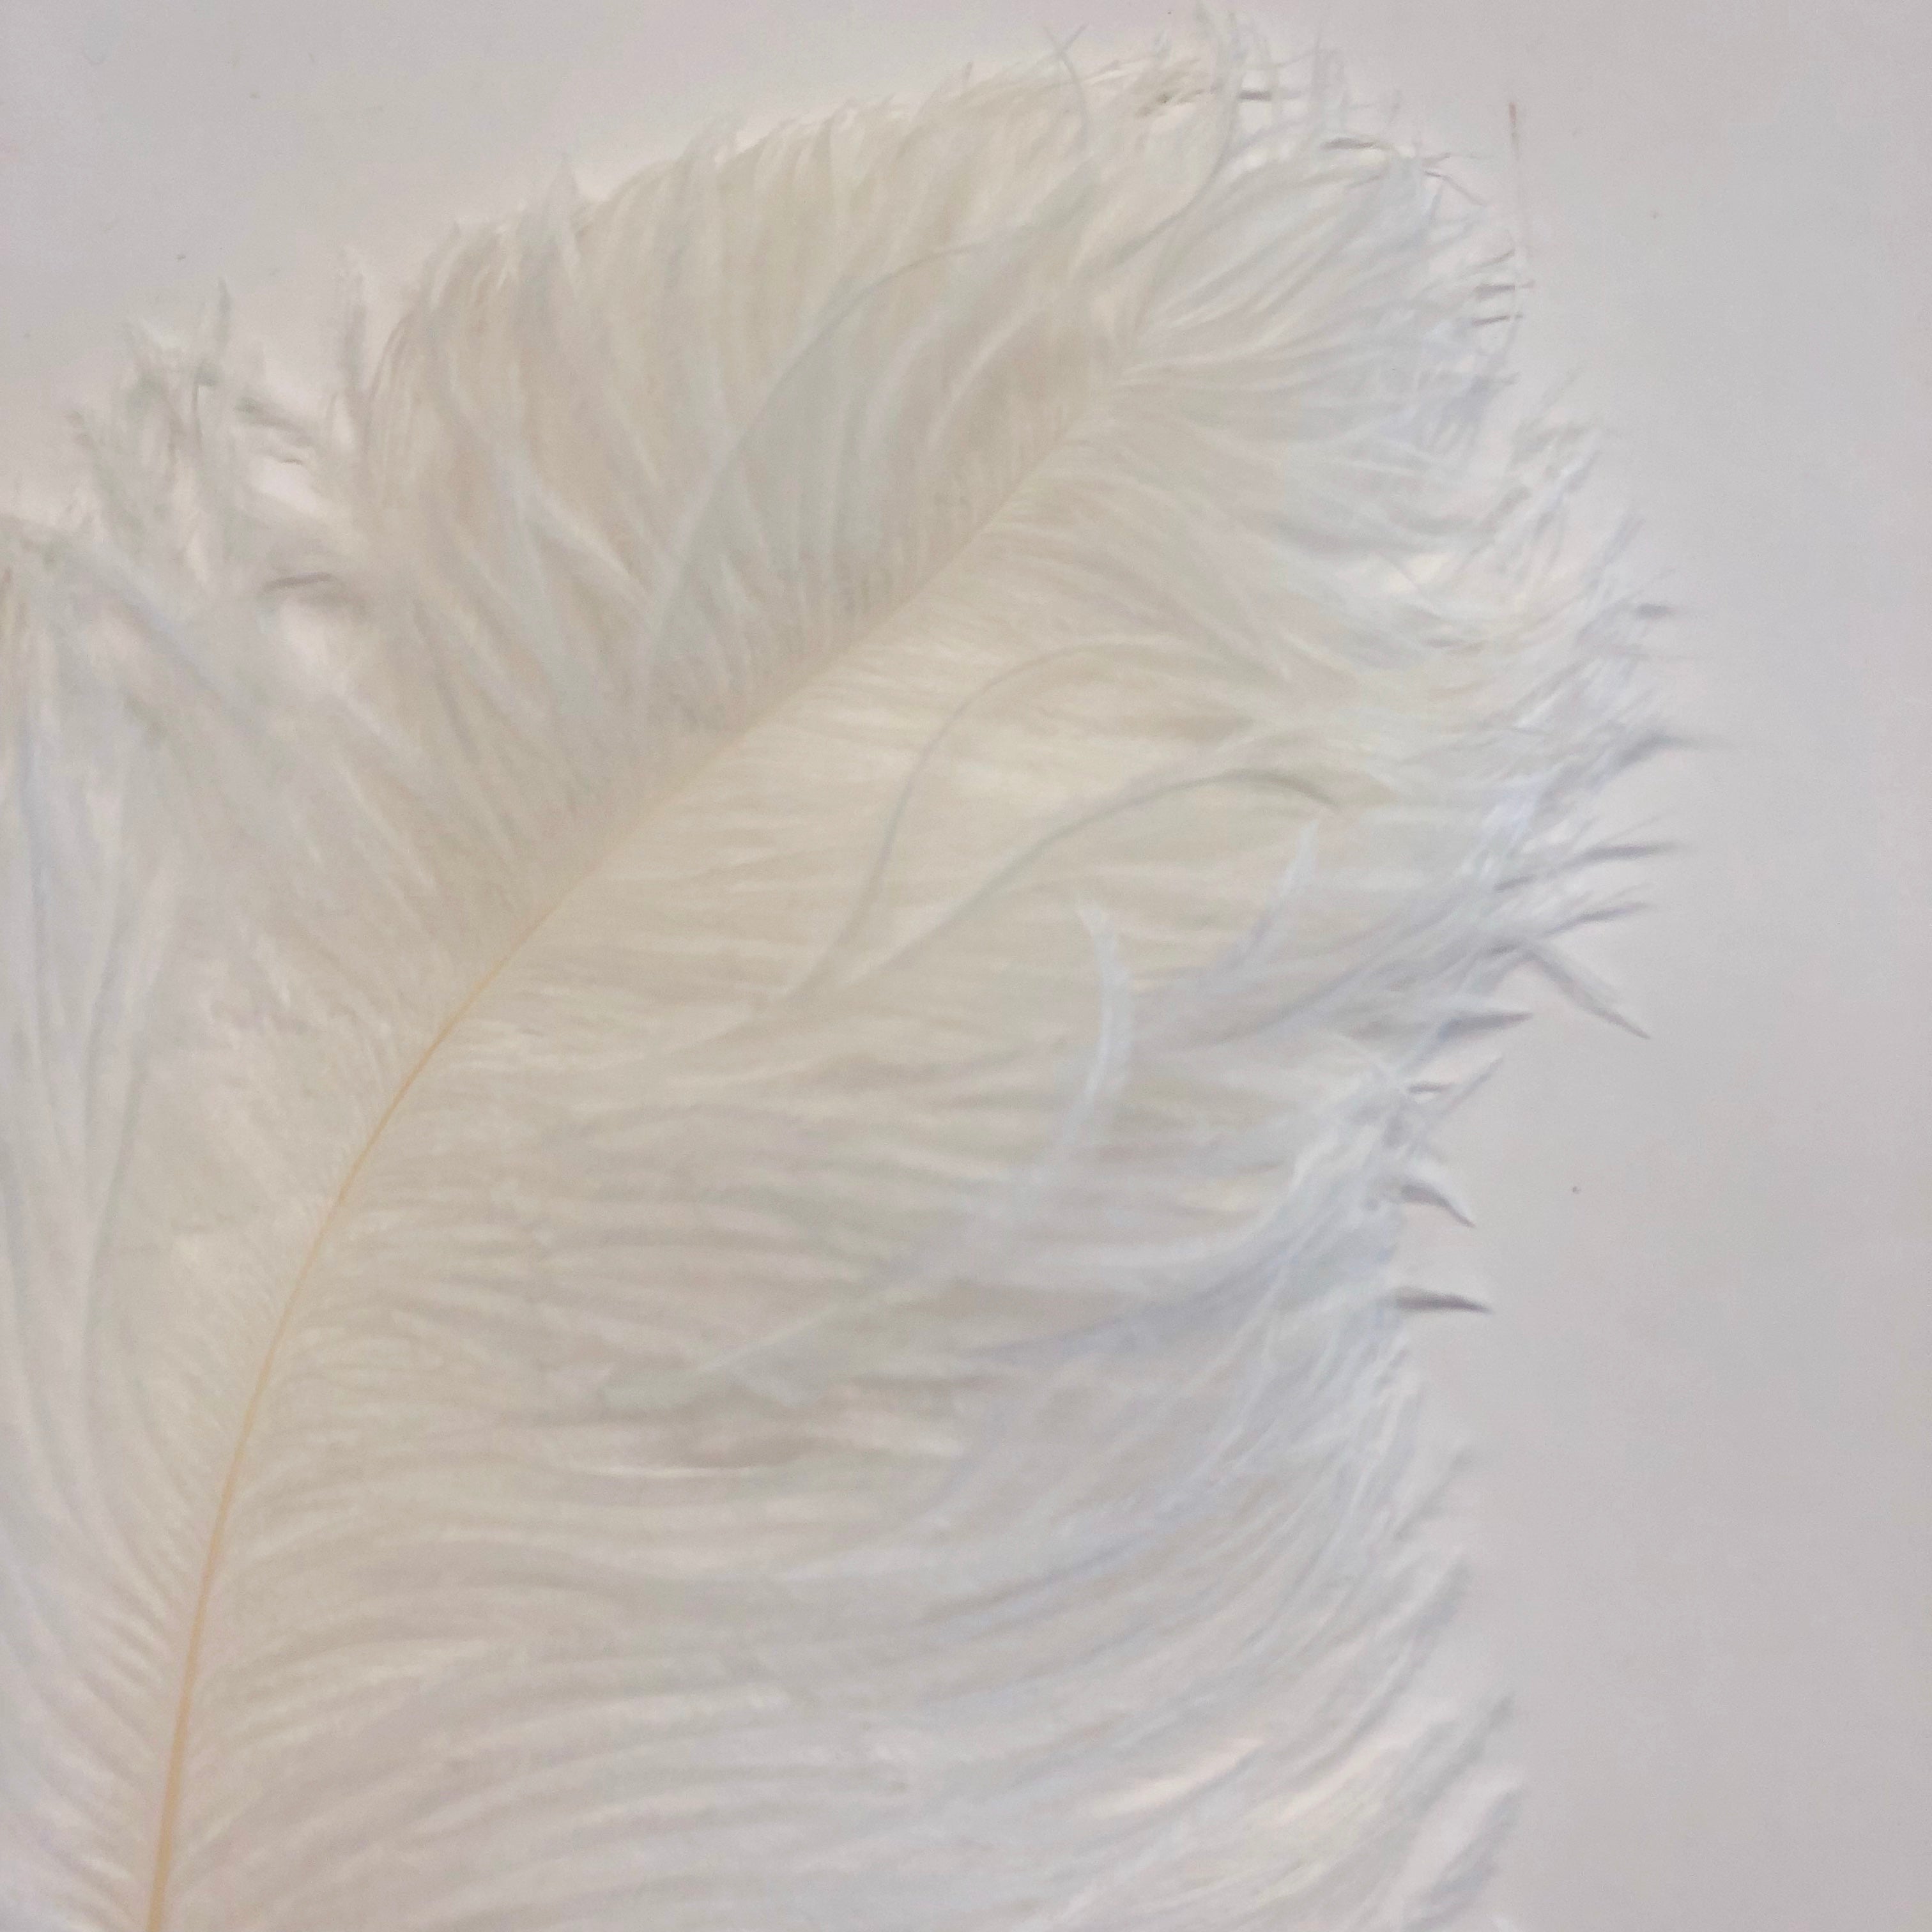 Ostrich Wing Feather Plumes 60-65cm (24-26") - Ivory